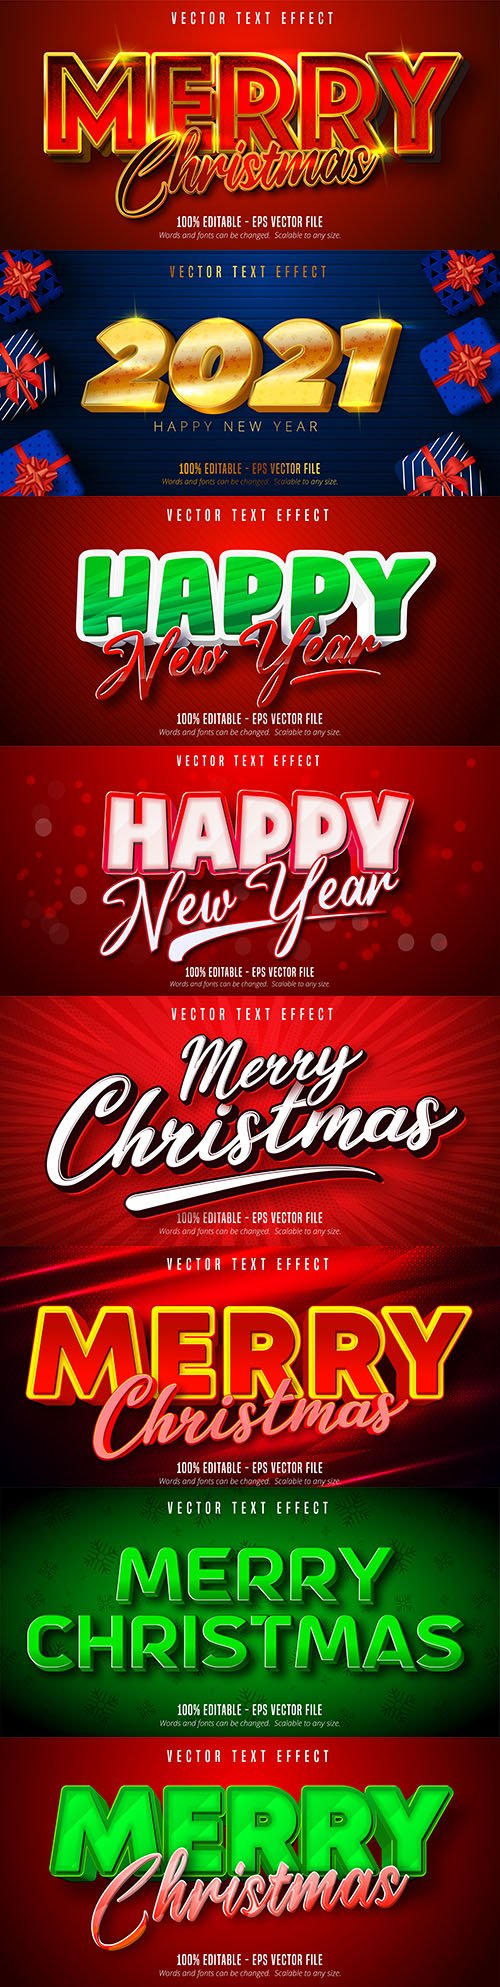 Merry Christmas editable font effect text collection illustration design